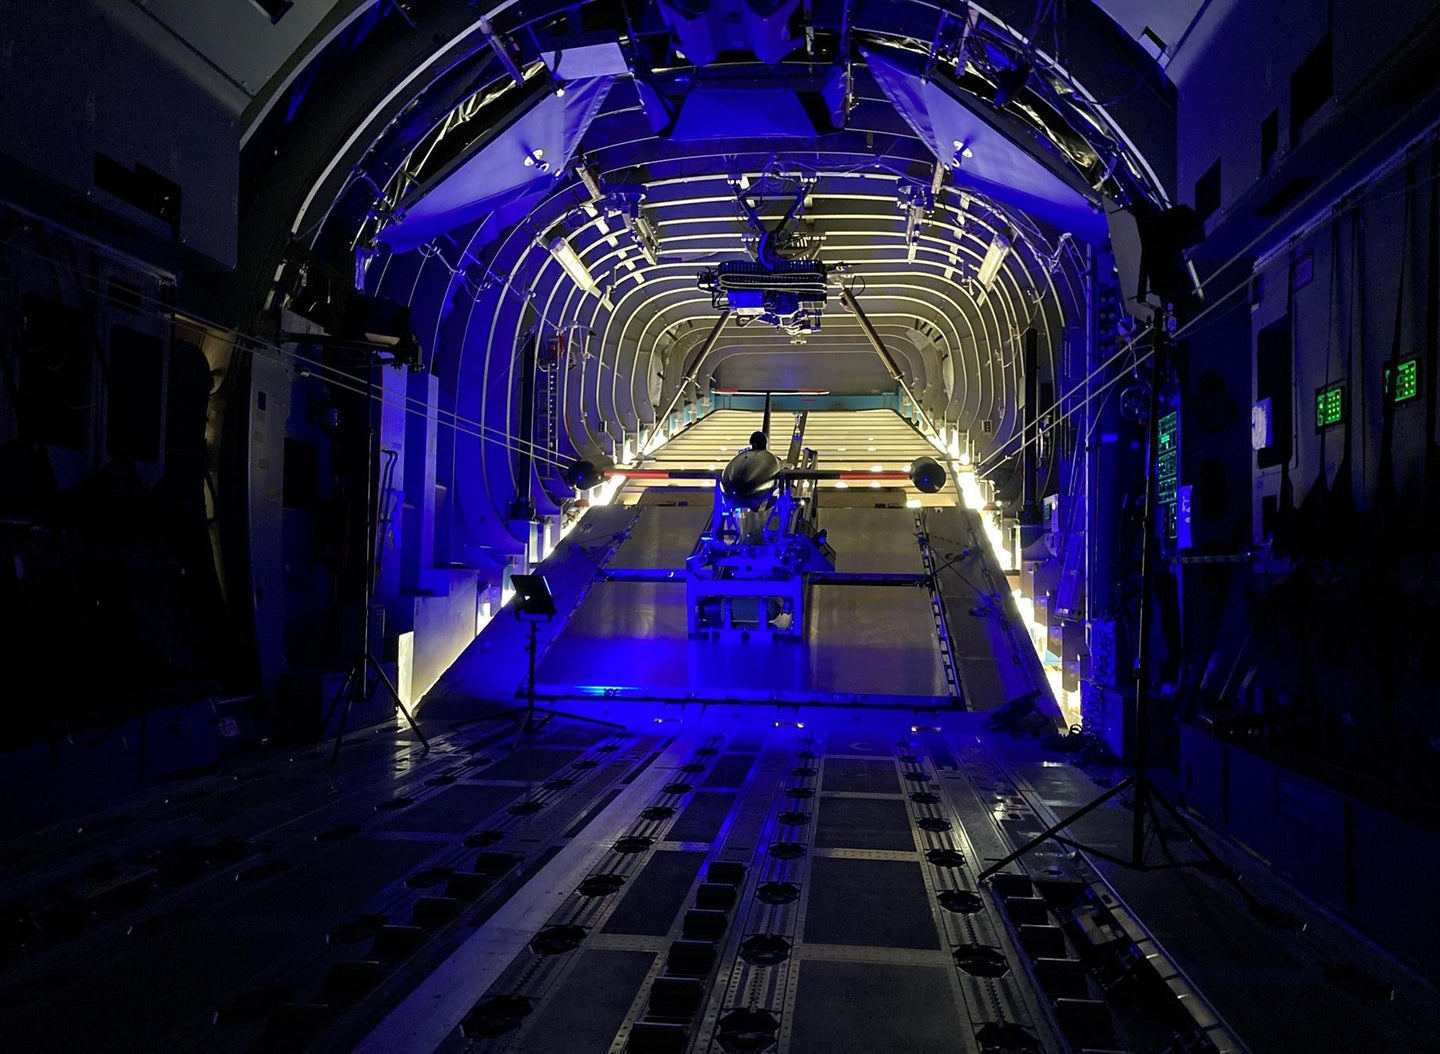 A drone in a launcher in the back of a cargo aircraft.